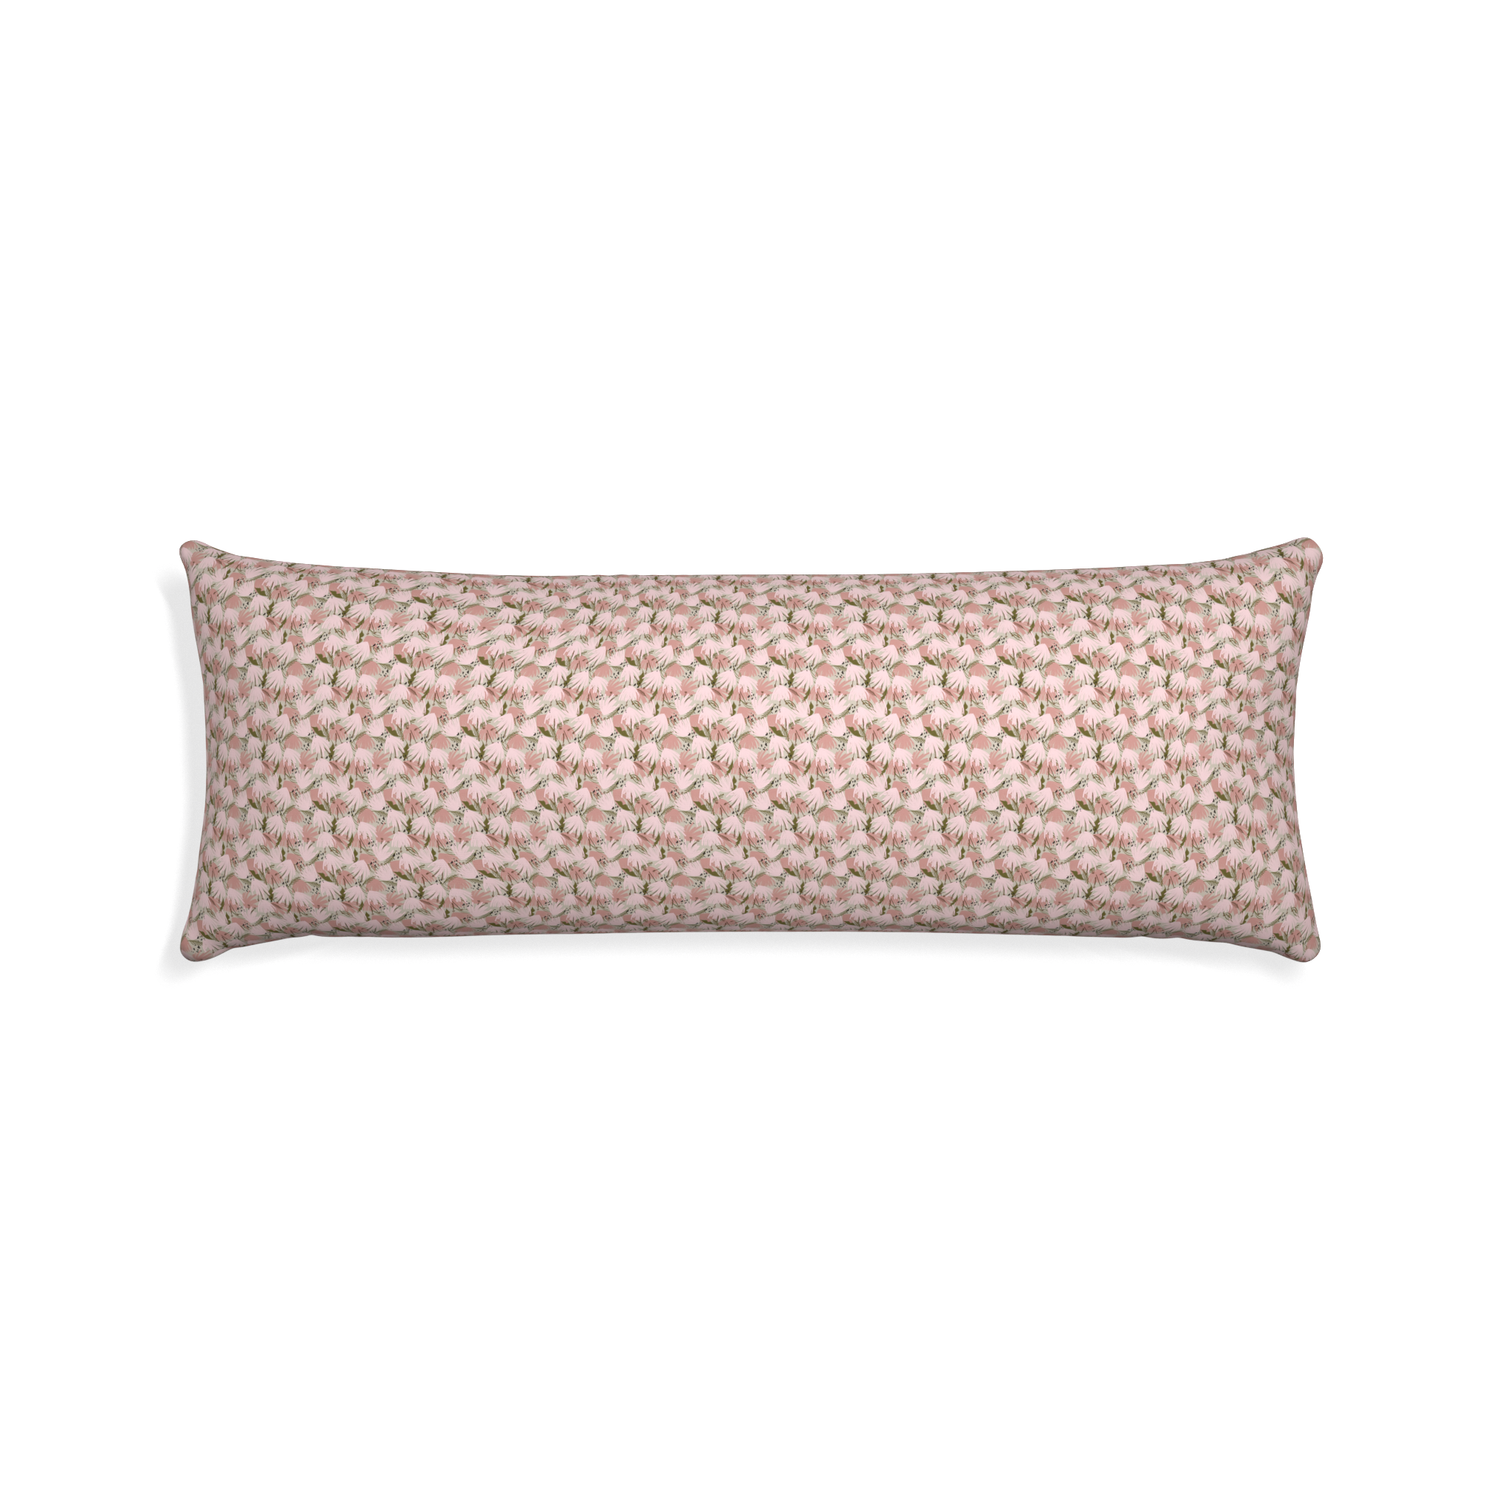 Xl-lumbar eden pink custom pillow with none on white background